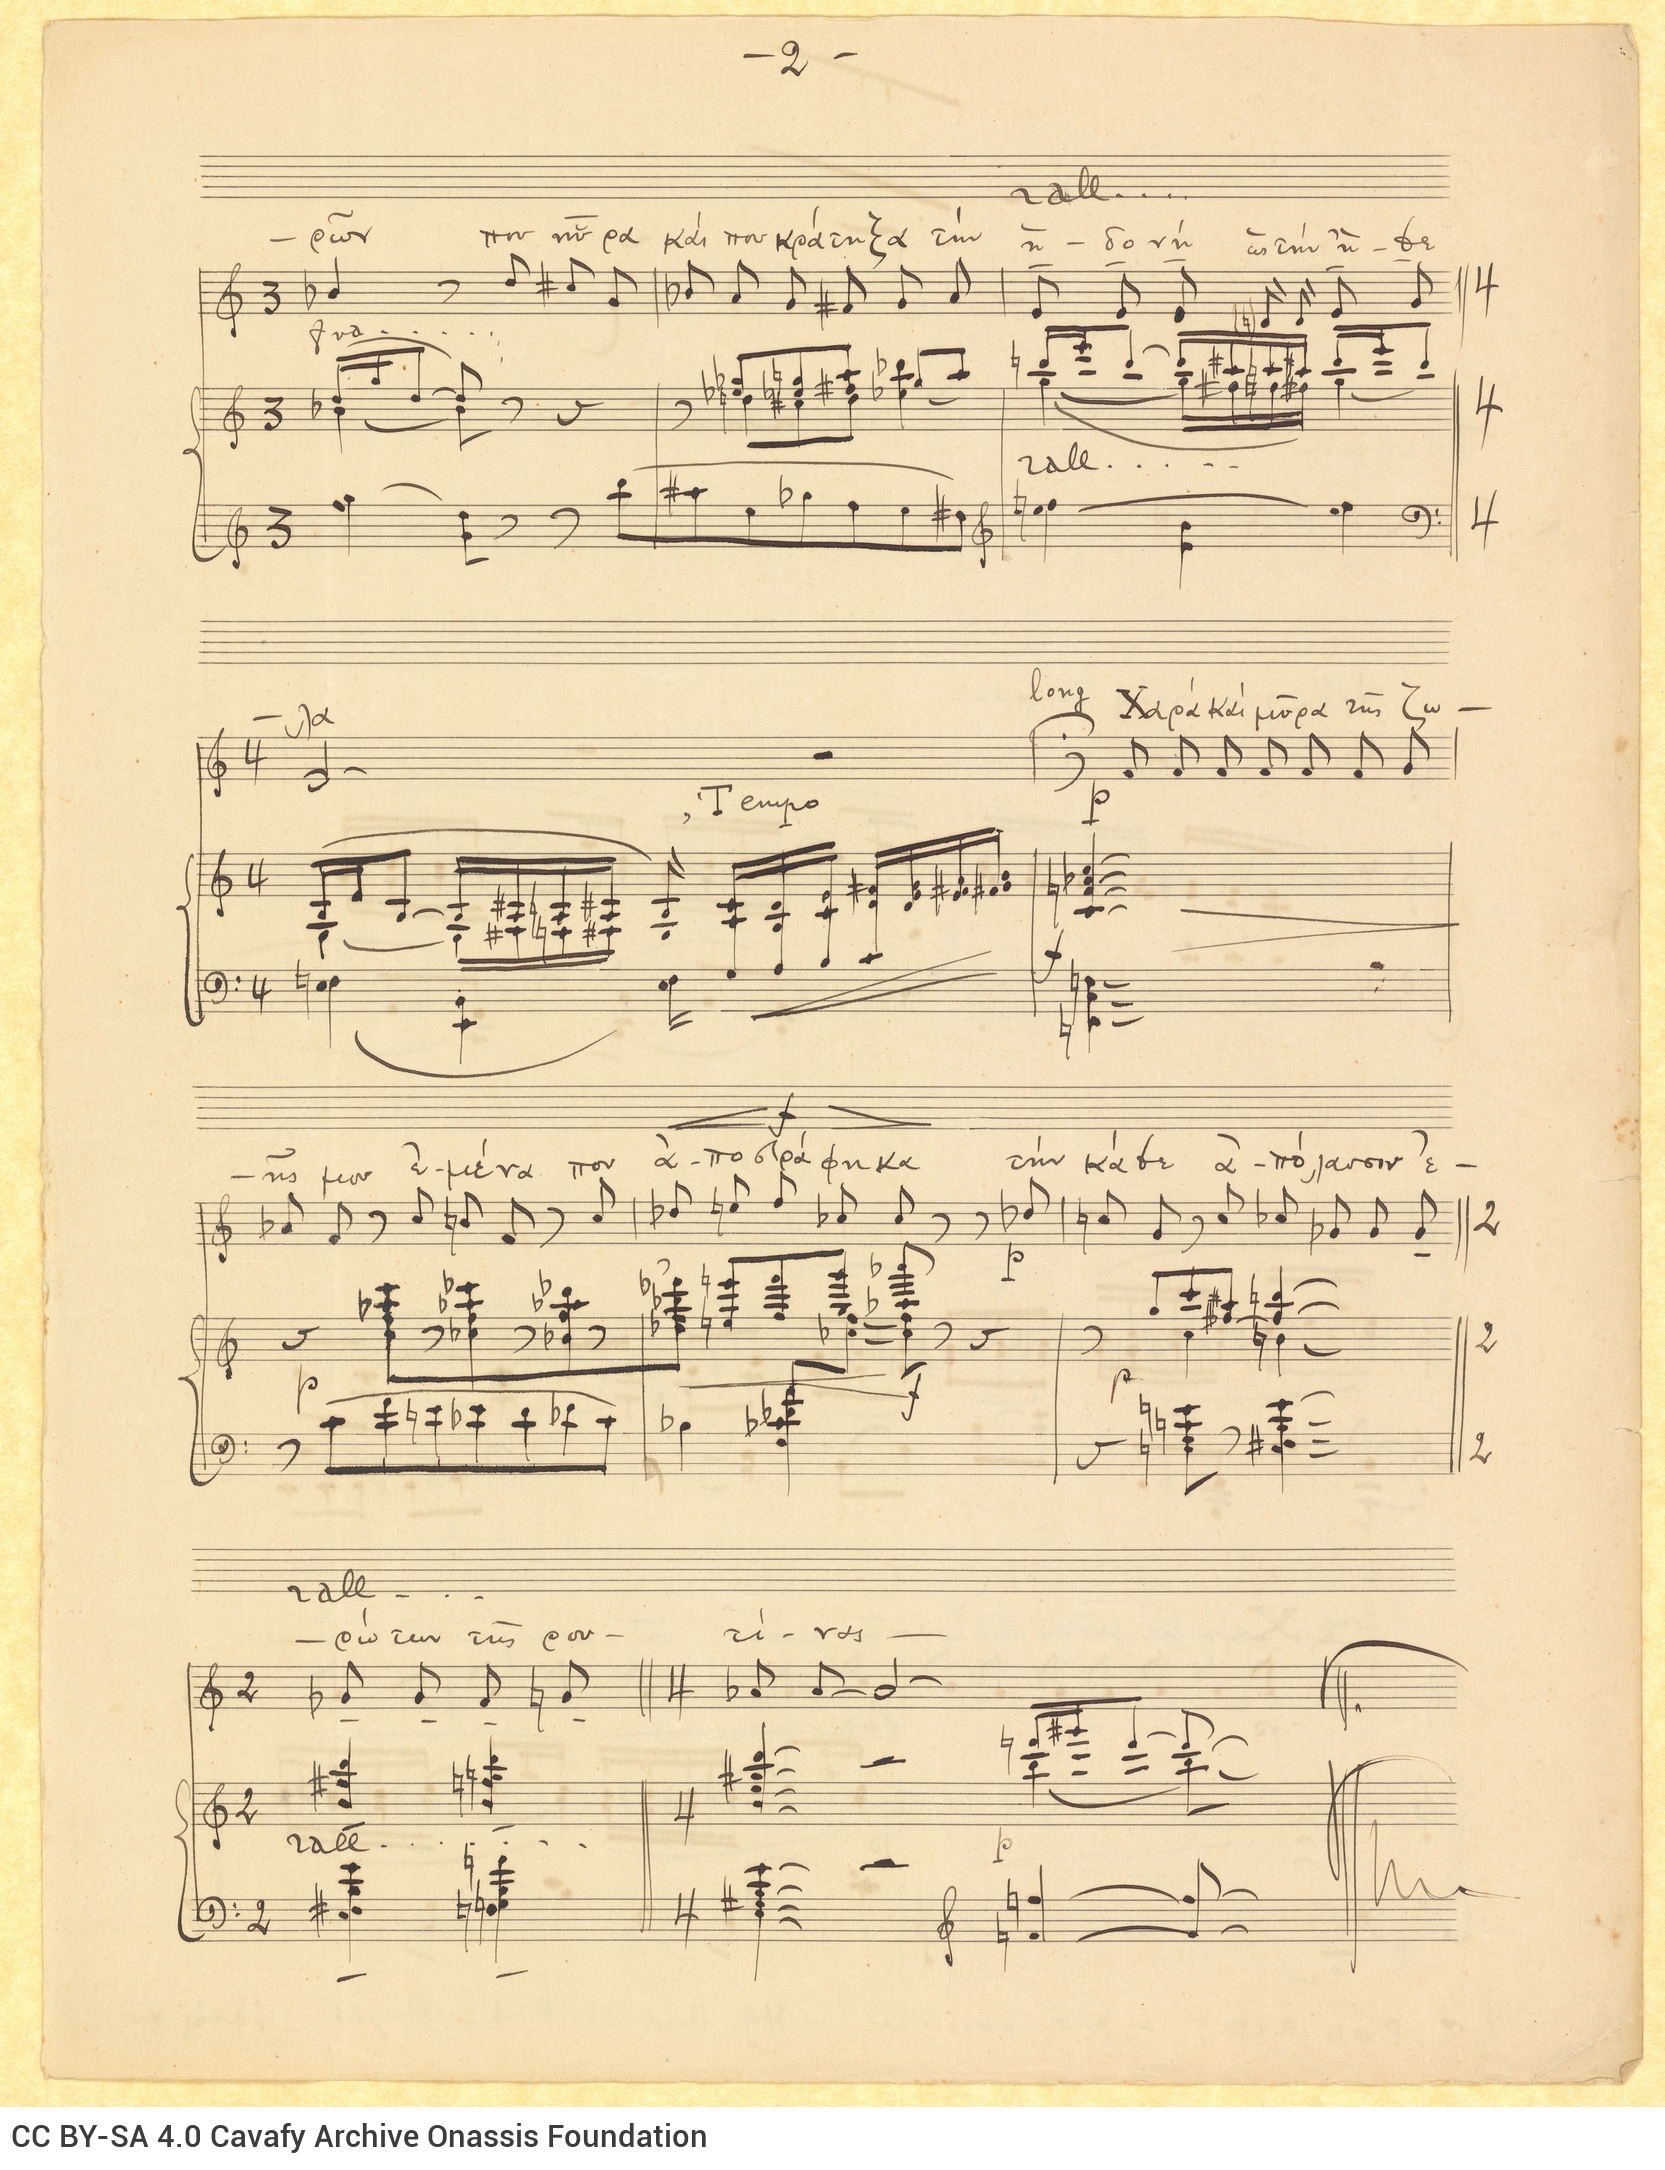 Handwritten musical score on both sides of a sheet. Composition for voice and piano, based on the poem "To Pleasure" by Ca